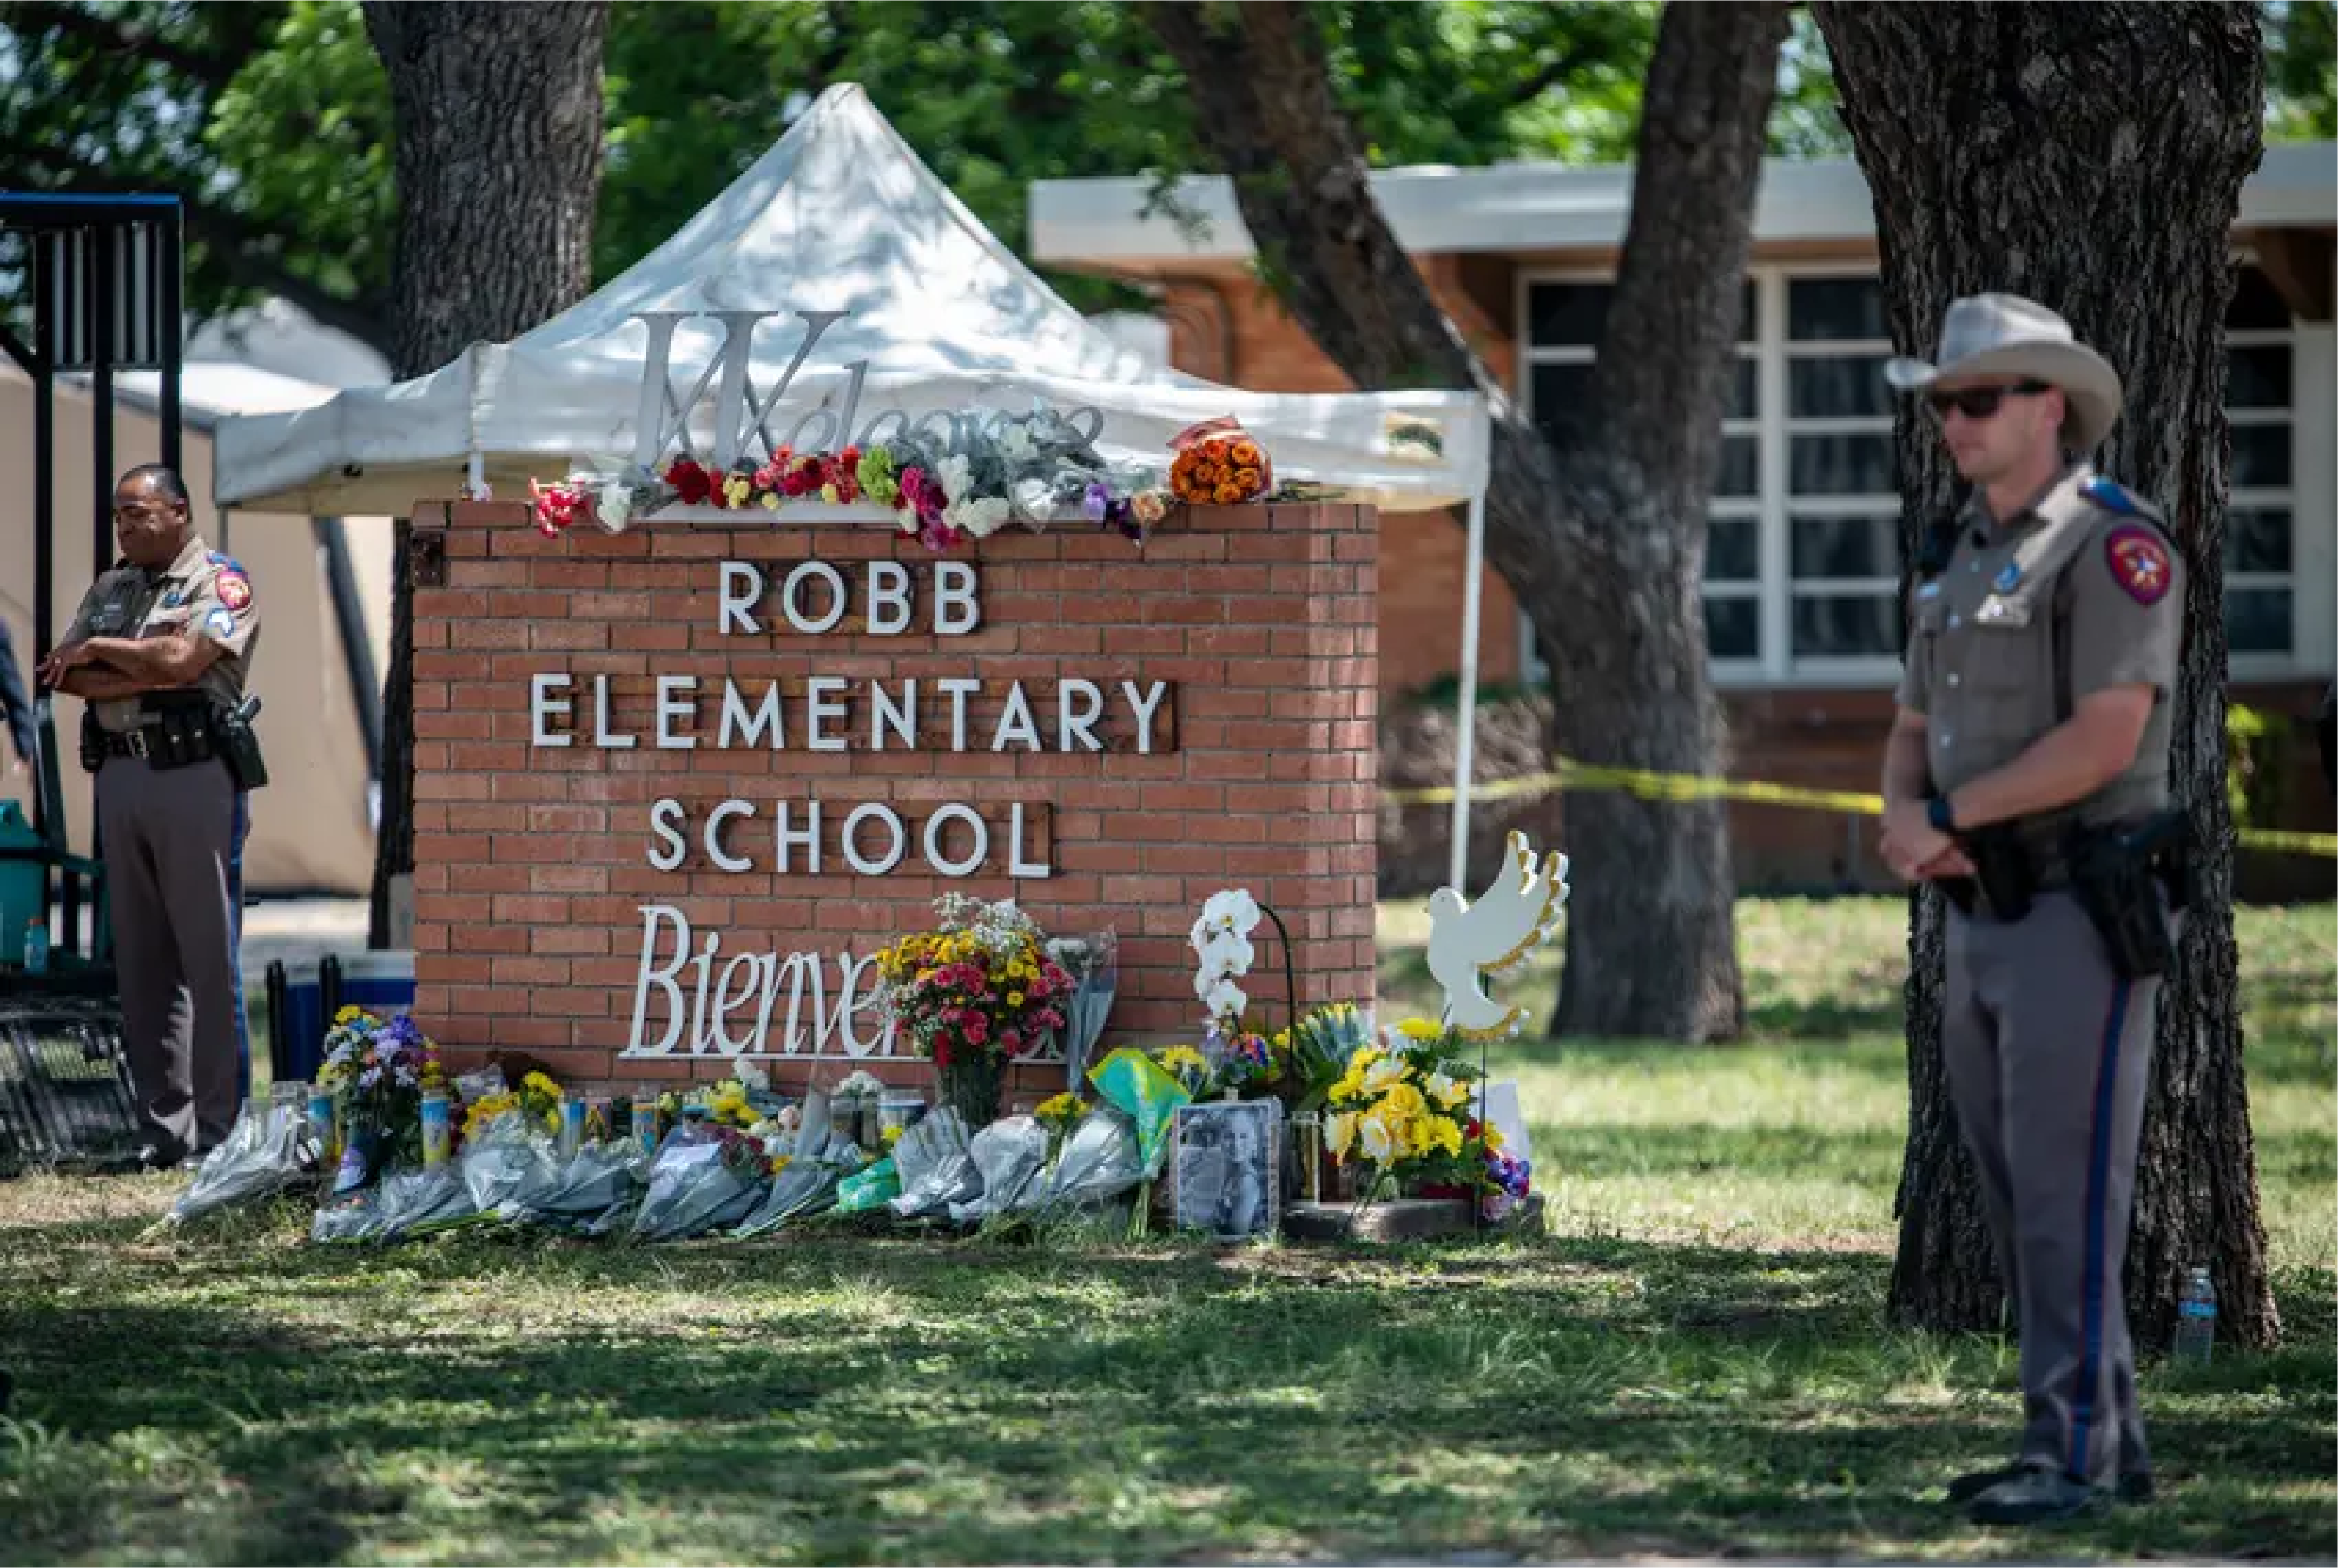 Law enforcement personnel work at the scene of a mass shooting in Robb Elementary School in Uvalde, Texas, May 25, 2022. (Sergio Flores for the Texas Tribune)